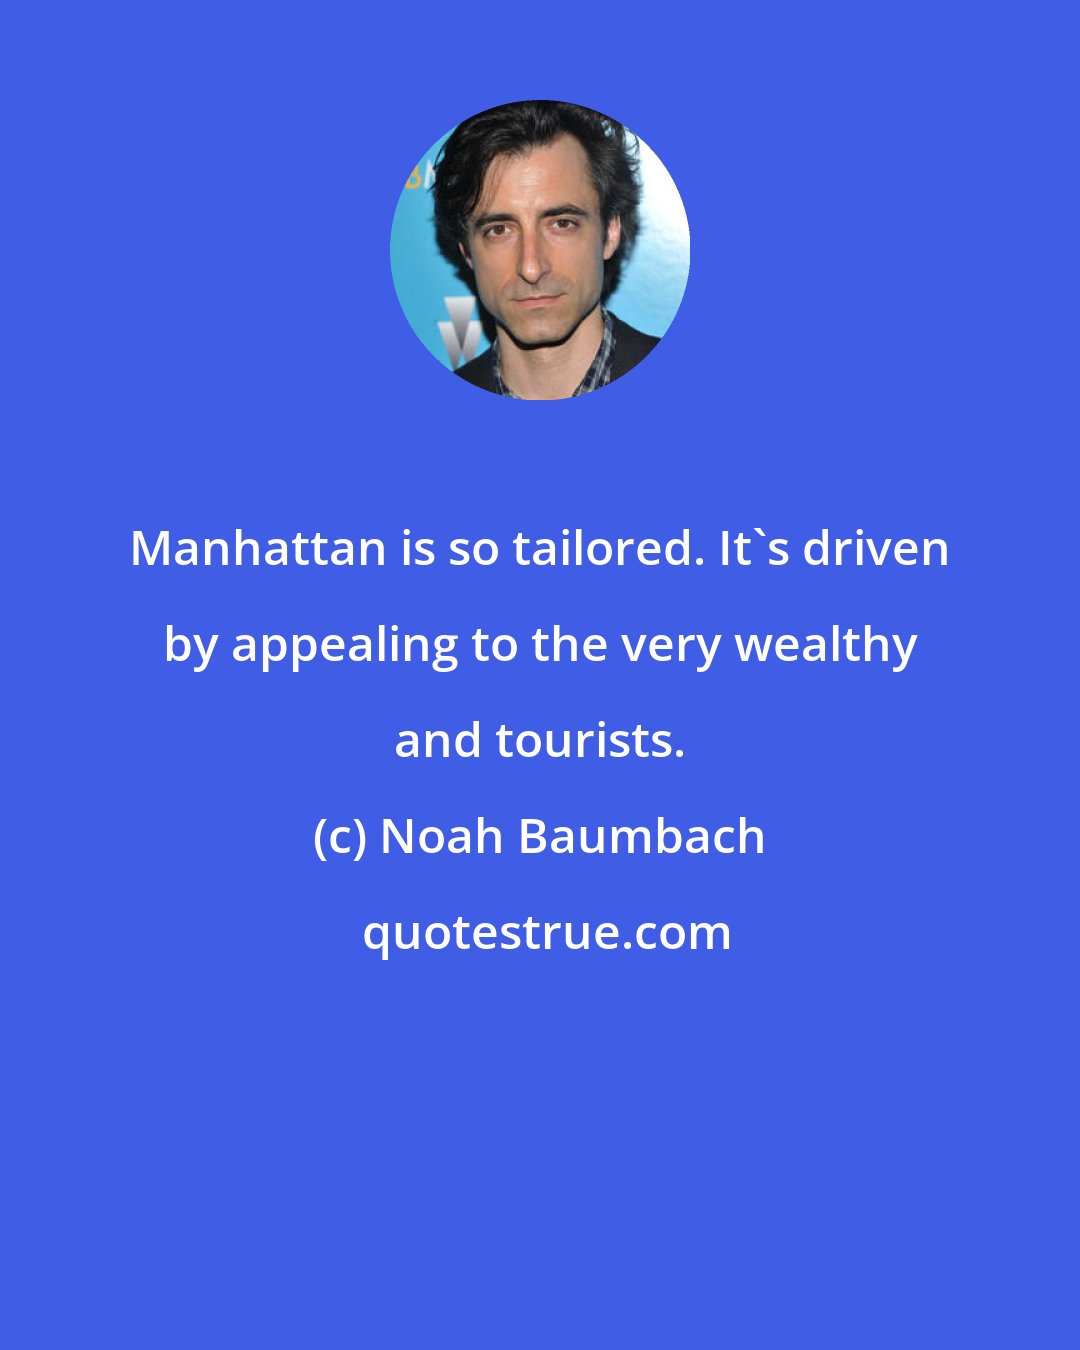 Noah Baumbach: Manhattan is so tailored. It's driven by appealing to the very wealthy and tourists.